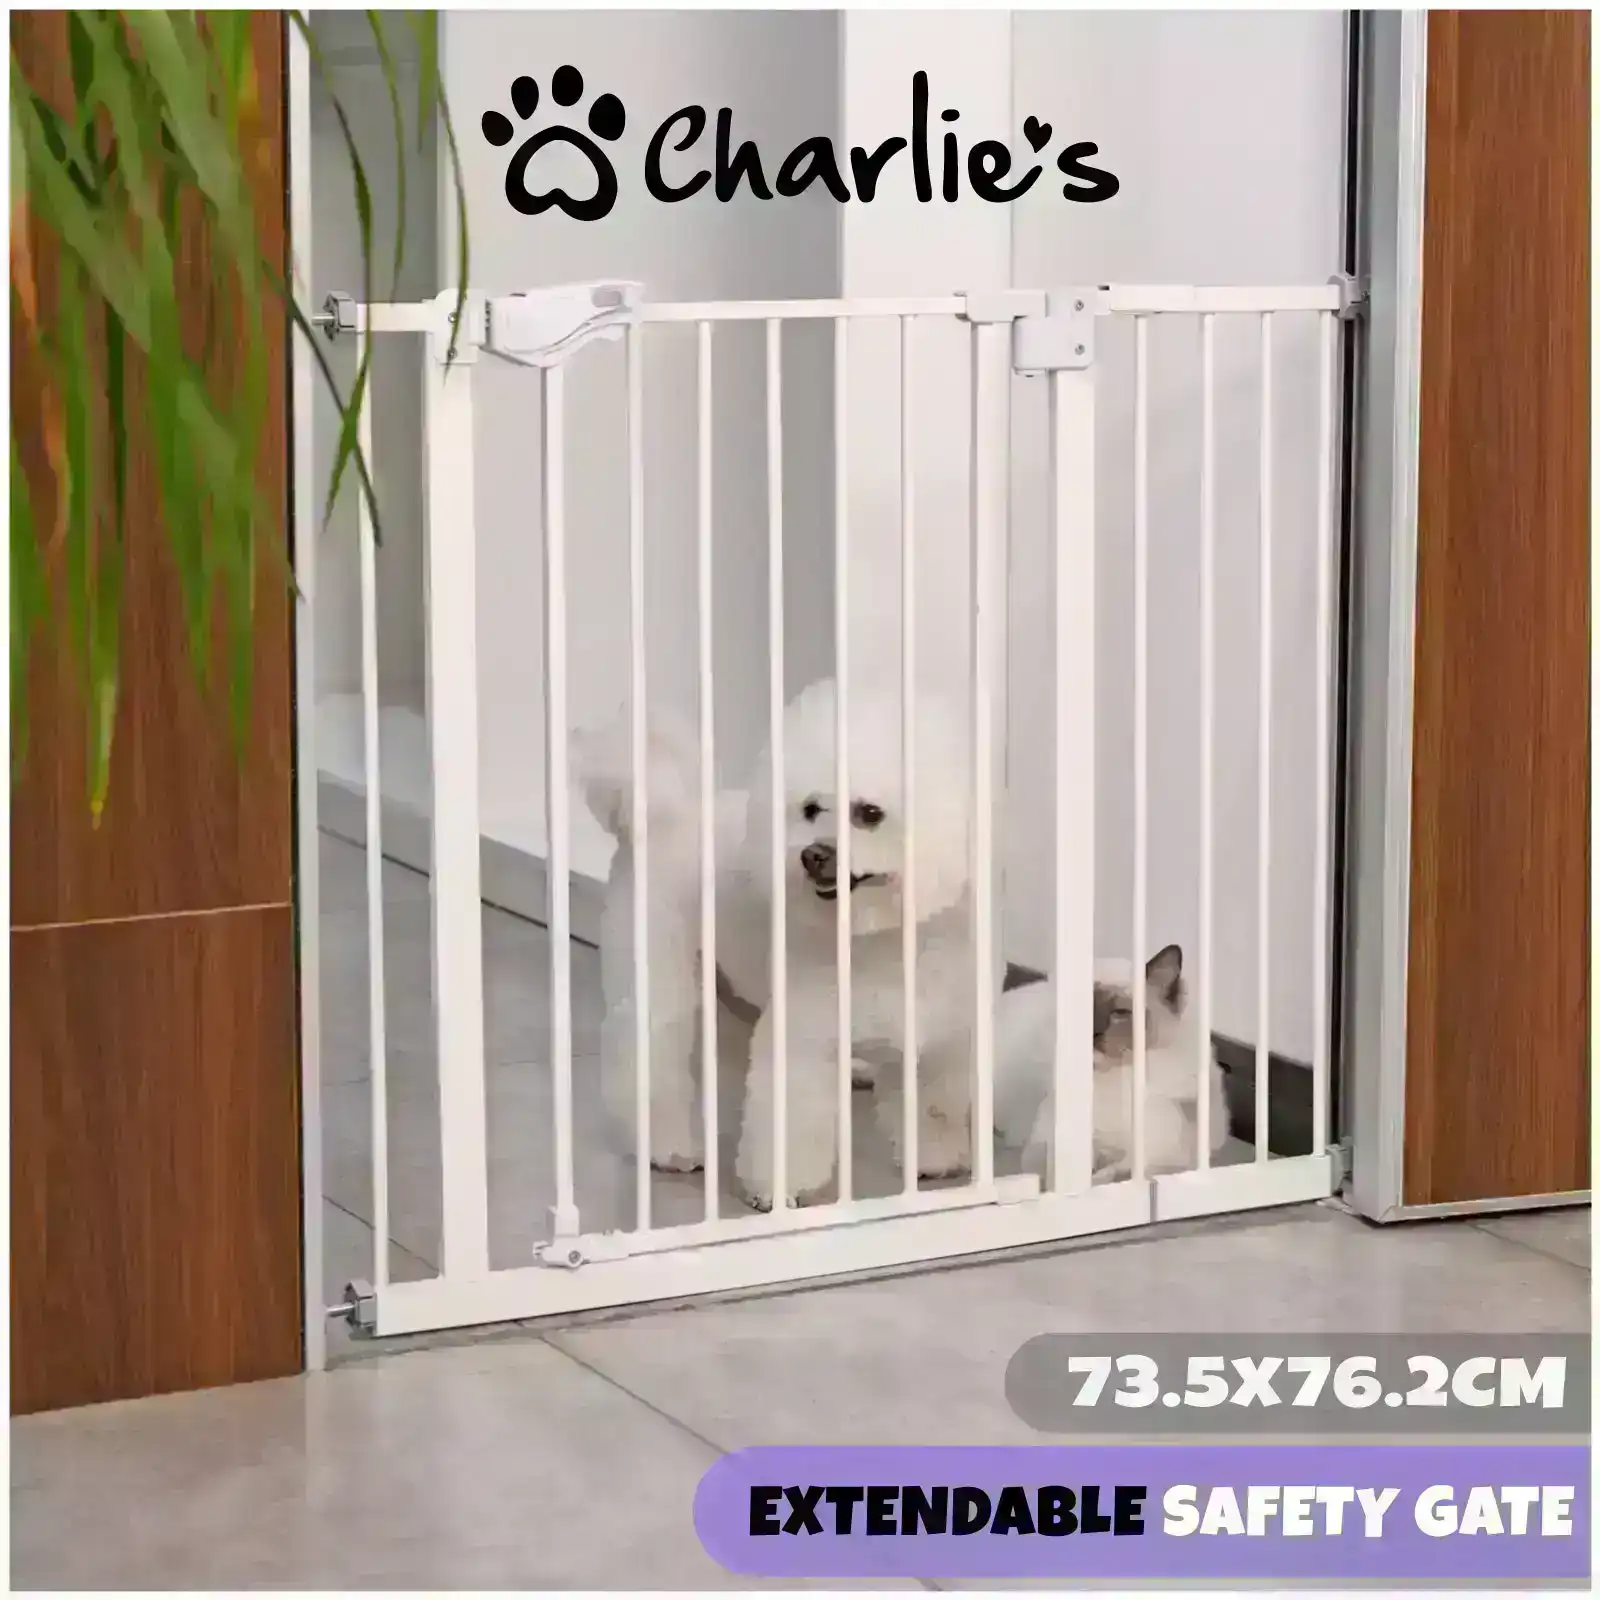 Charlie's Essential Extendable Pet Safety Gate White